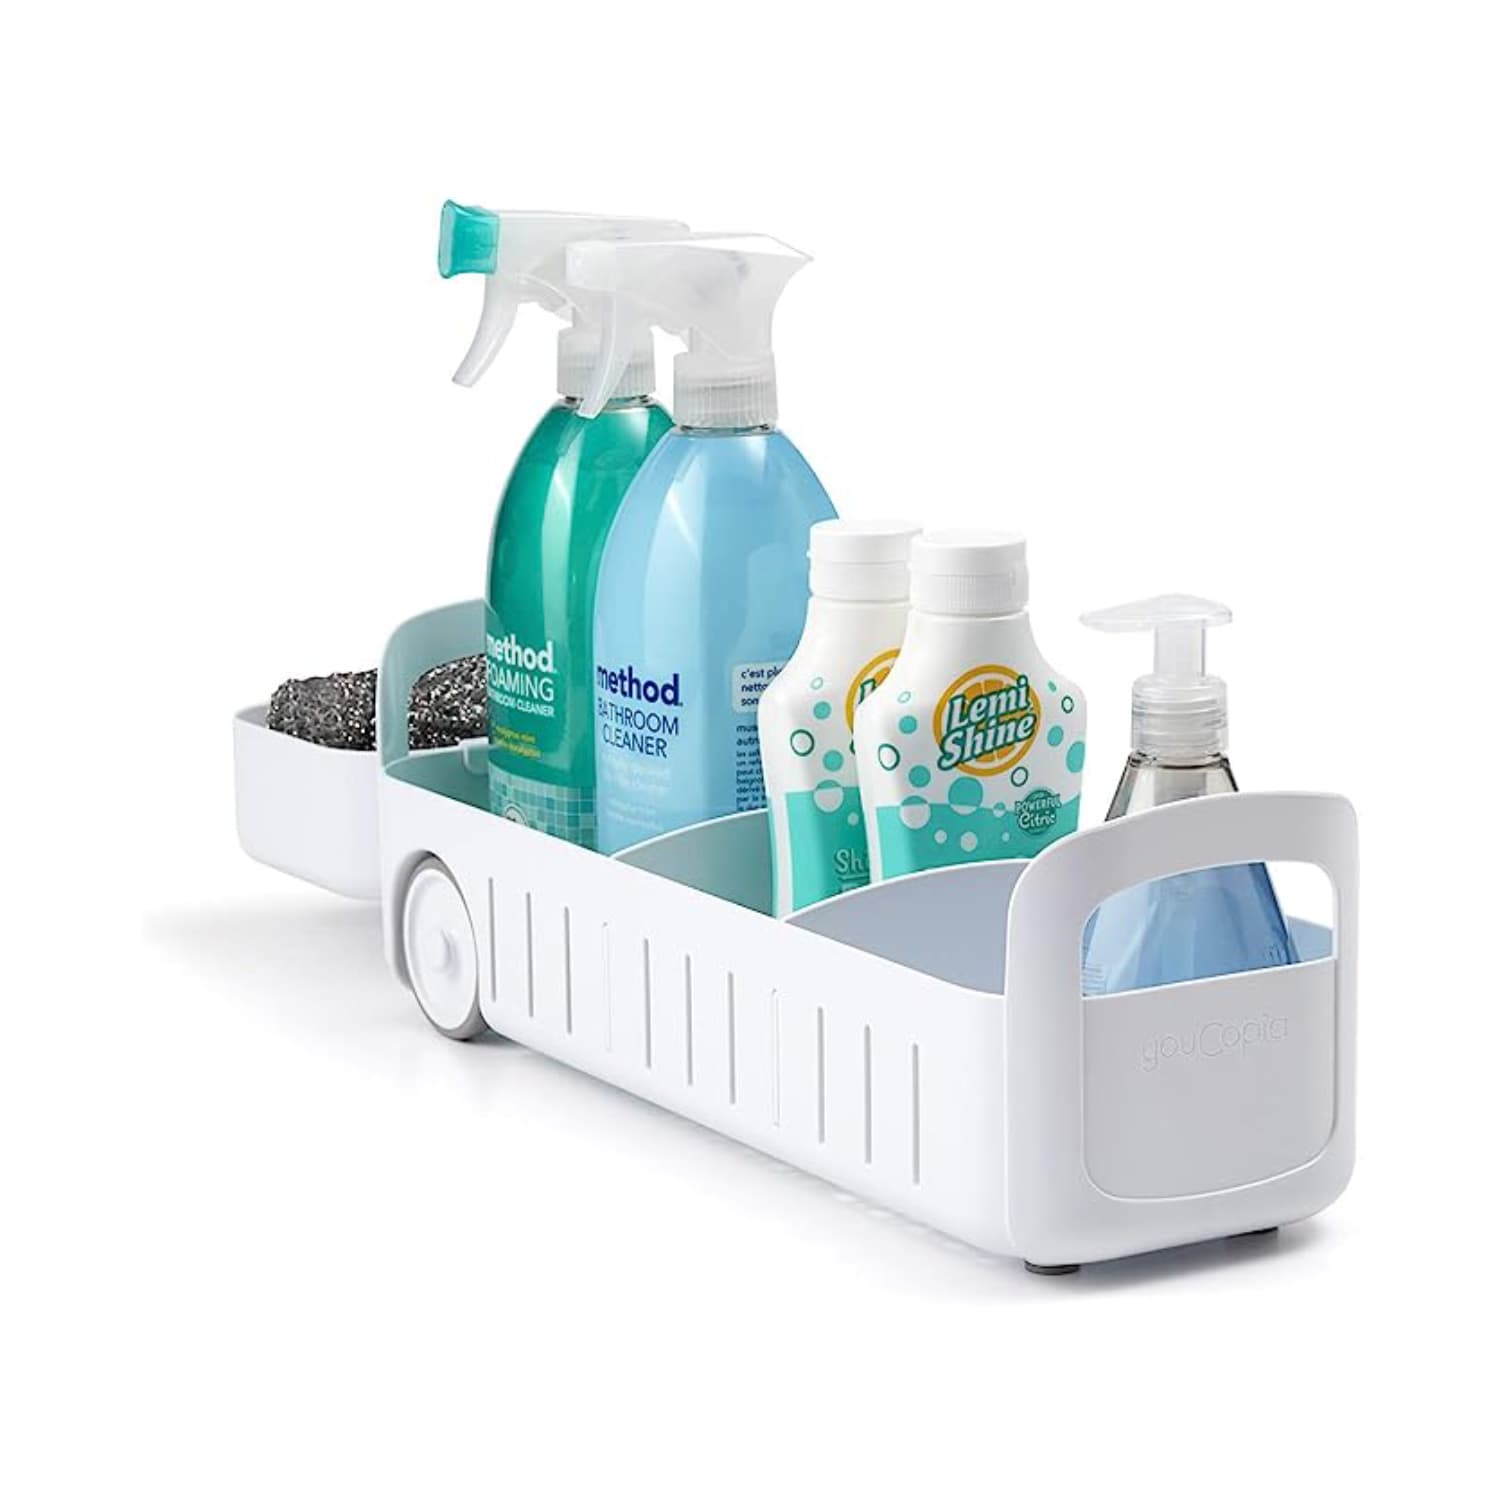 YouCopia $30 Under-Sink Cleaning Supplies Organizer Review